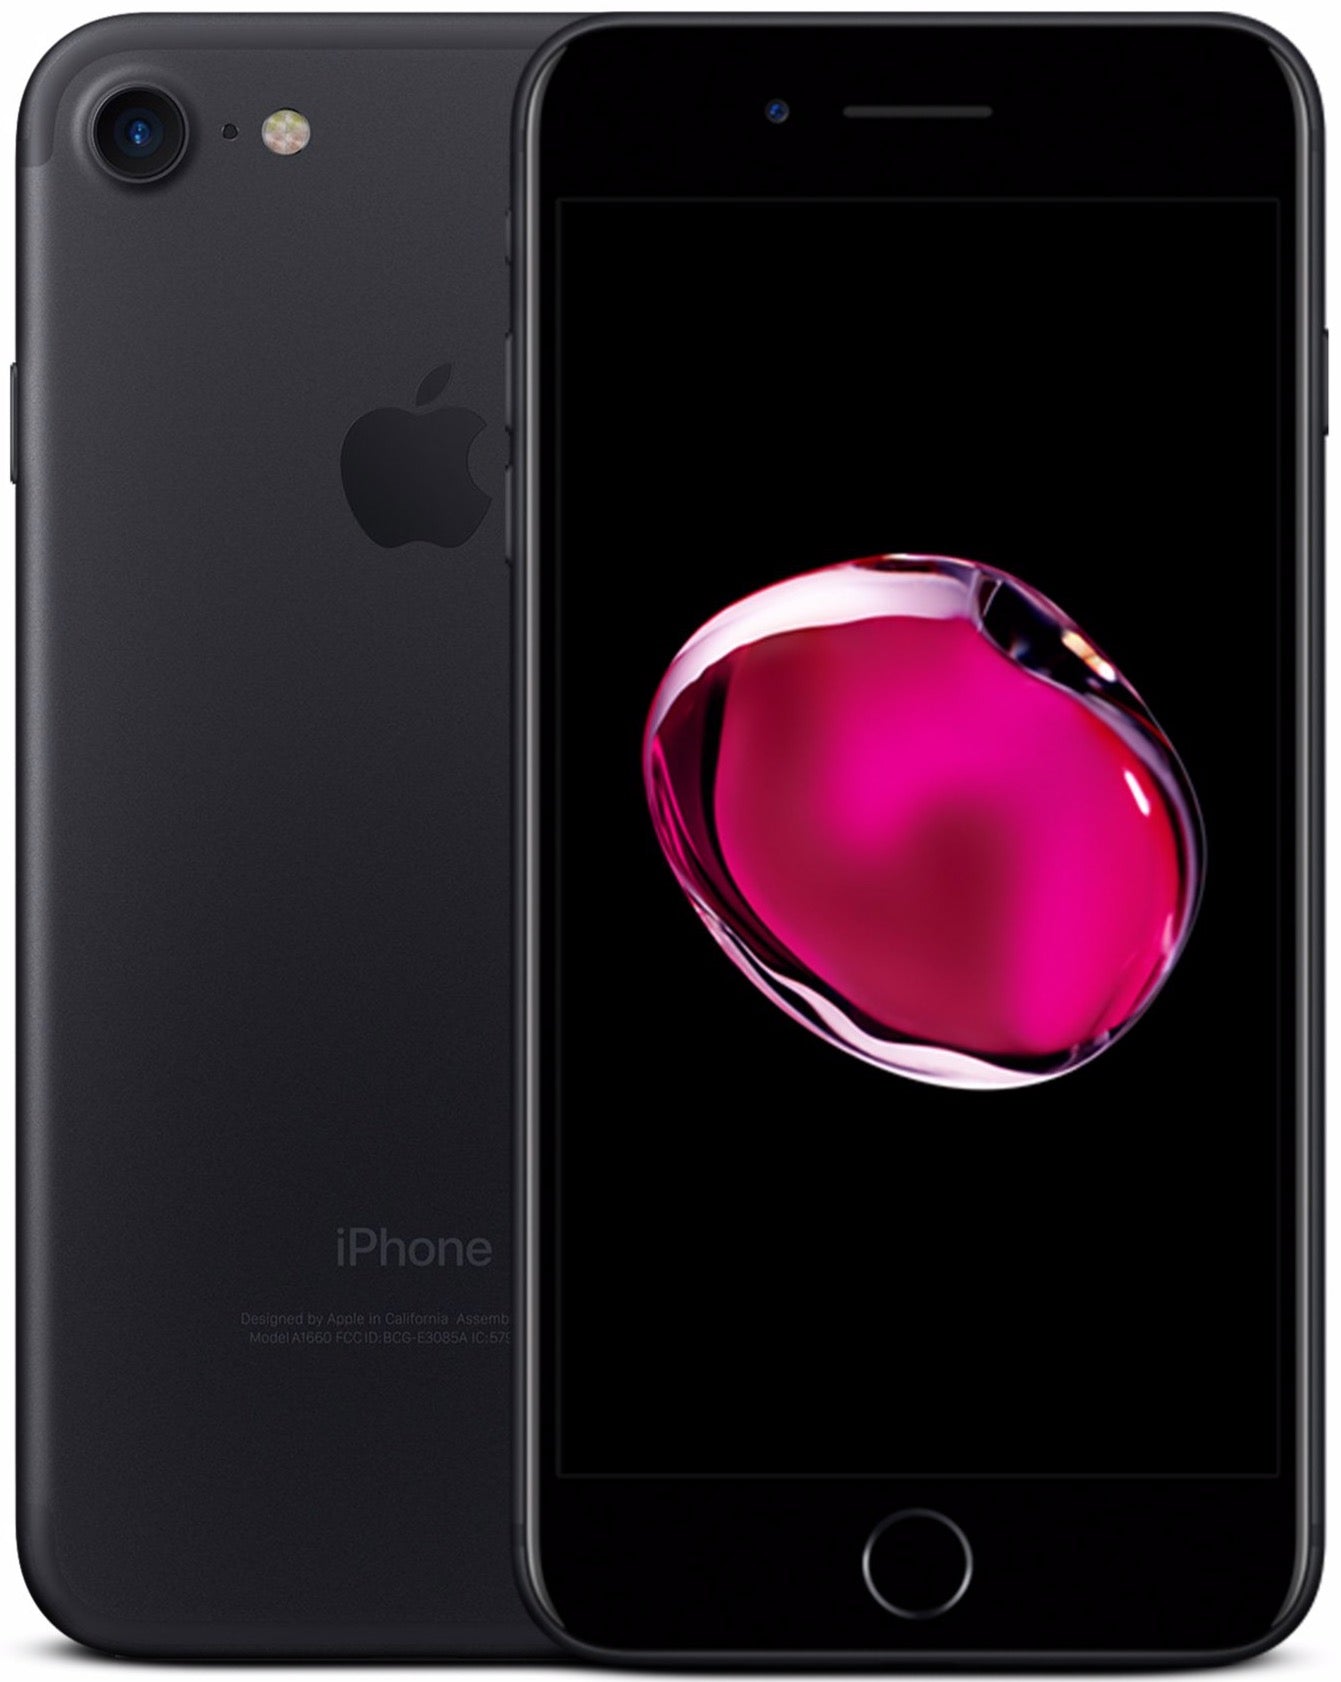 Apple iPhone 7 128GB Space Gray (Excellent)*Free Shipping, New Case & Glass Screen Protector*